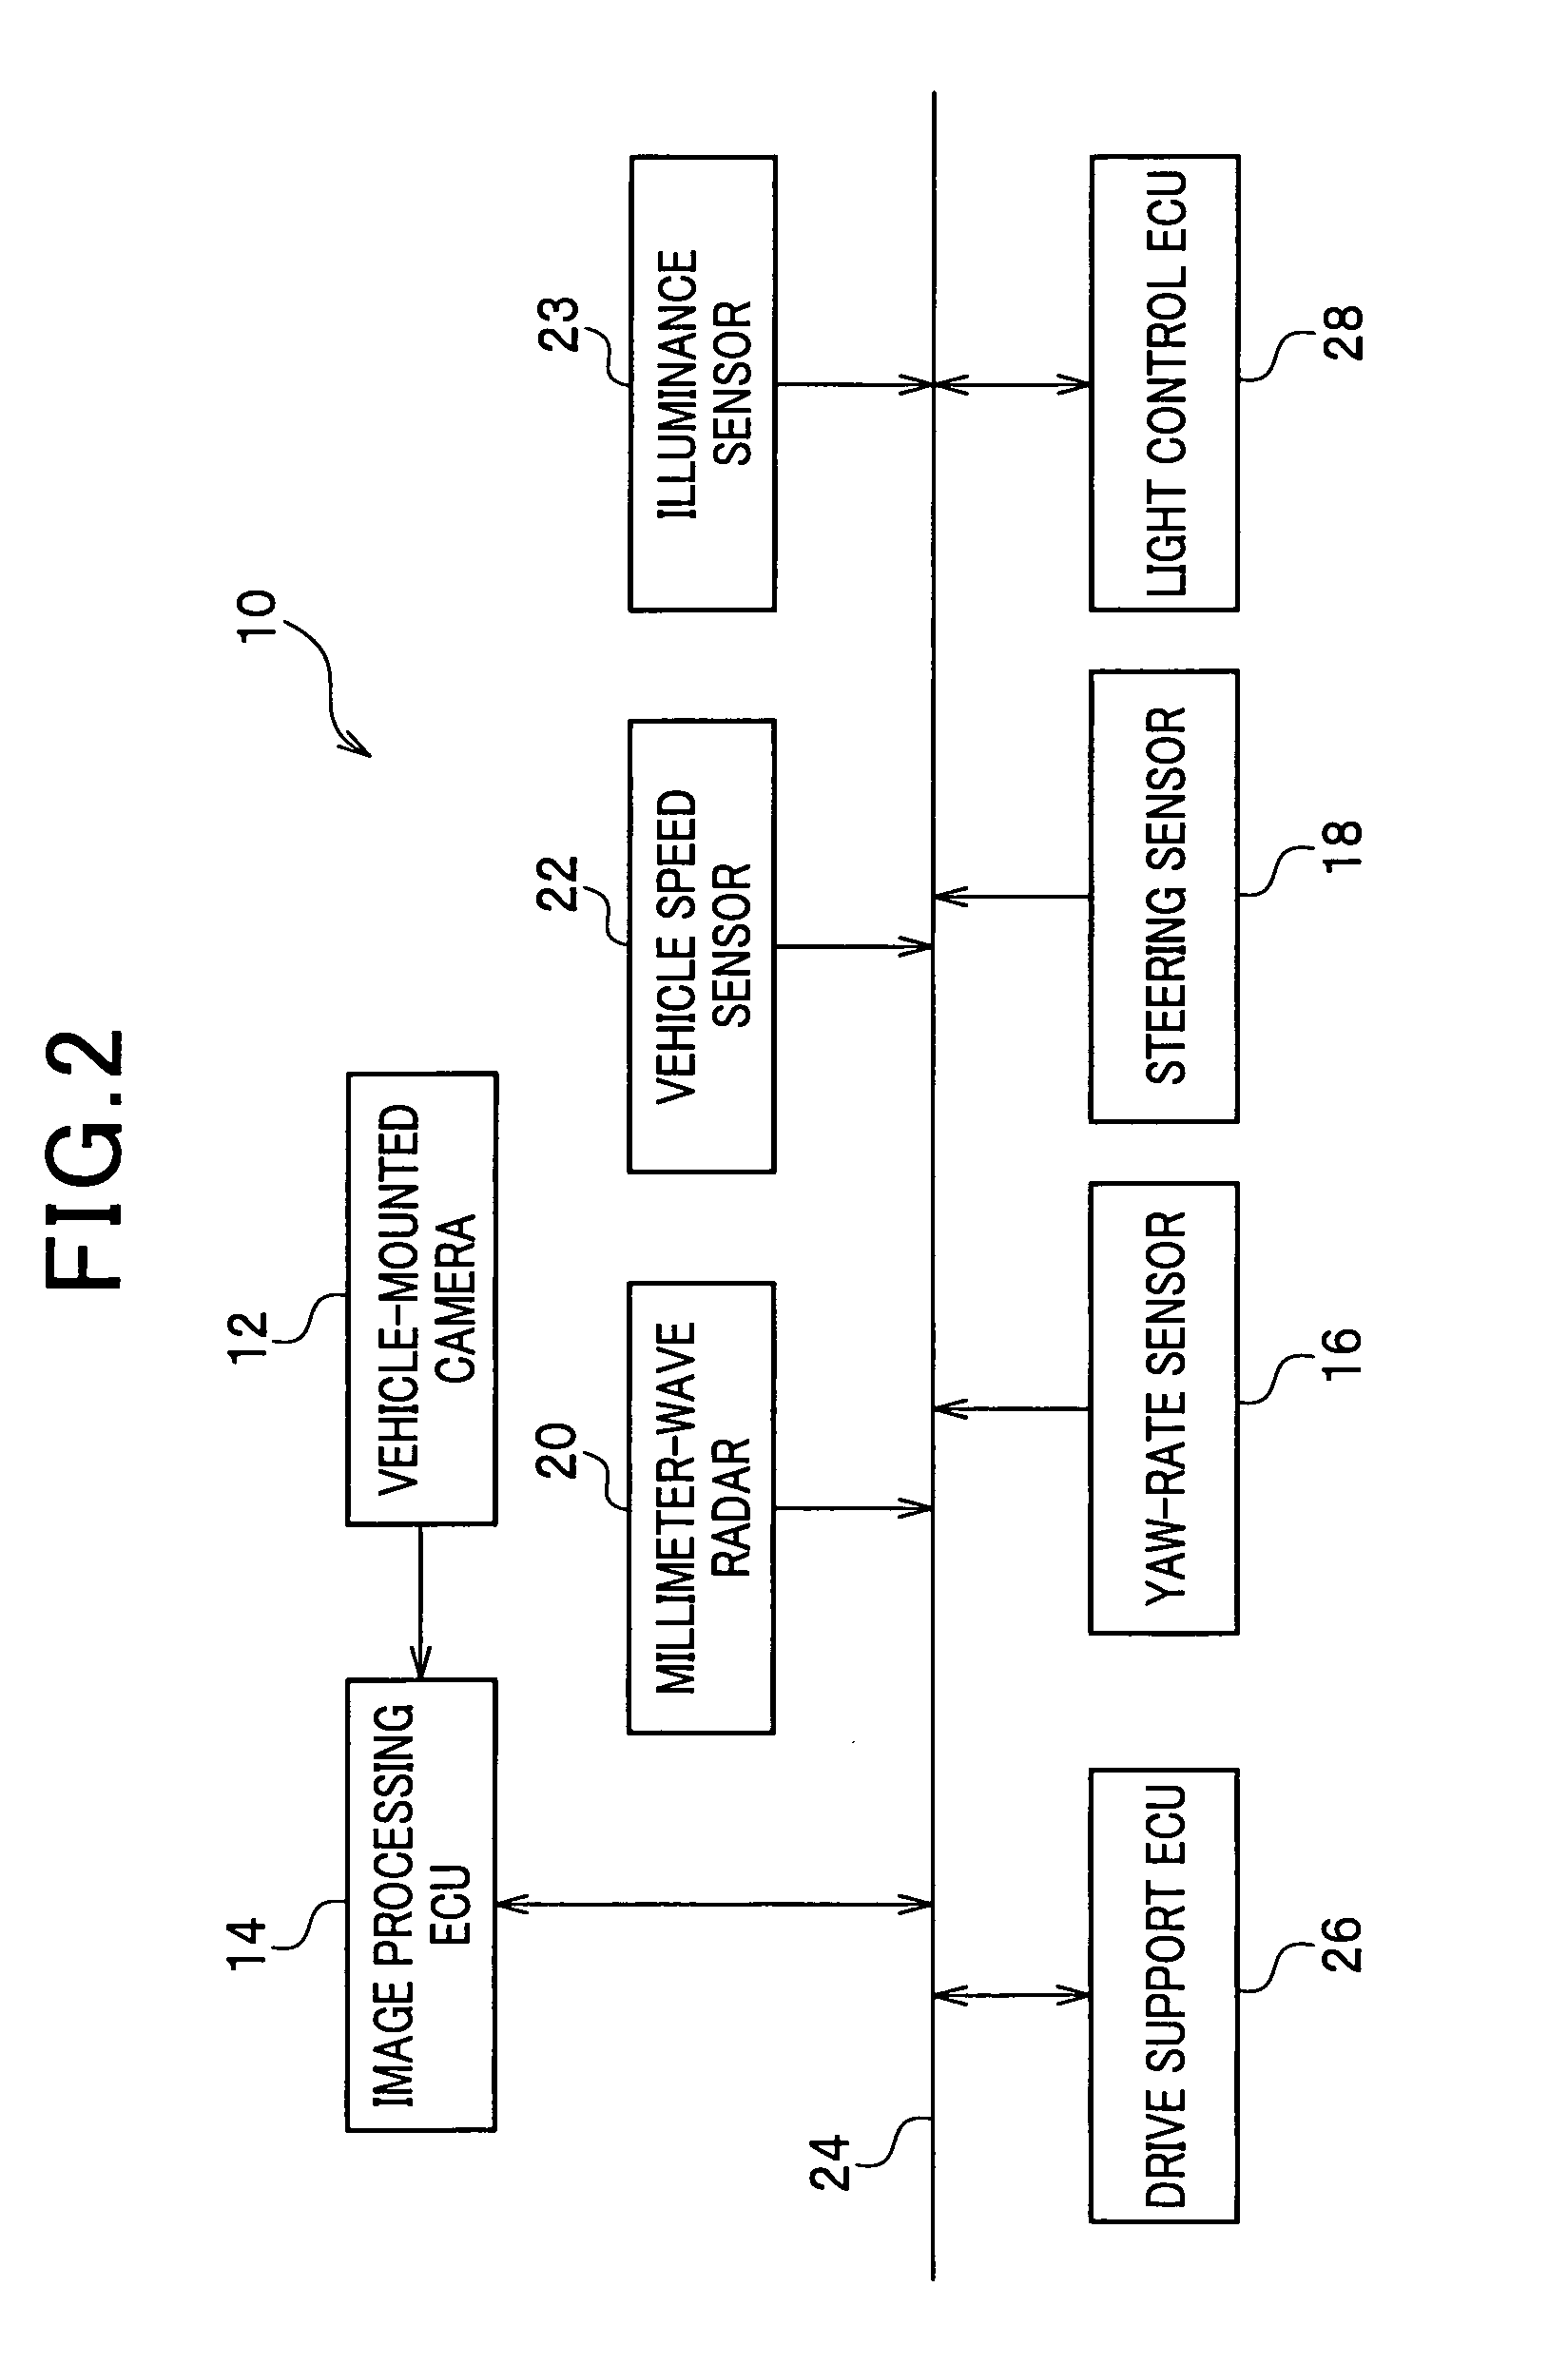 Apparatus for determining the presence of fog using image obtained by vehicle-mounted imaging device